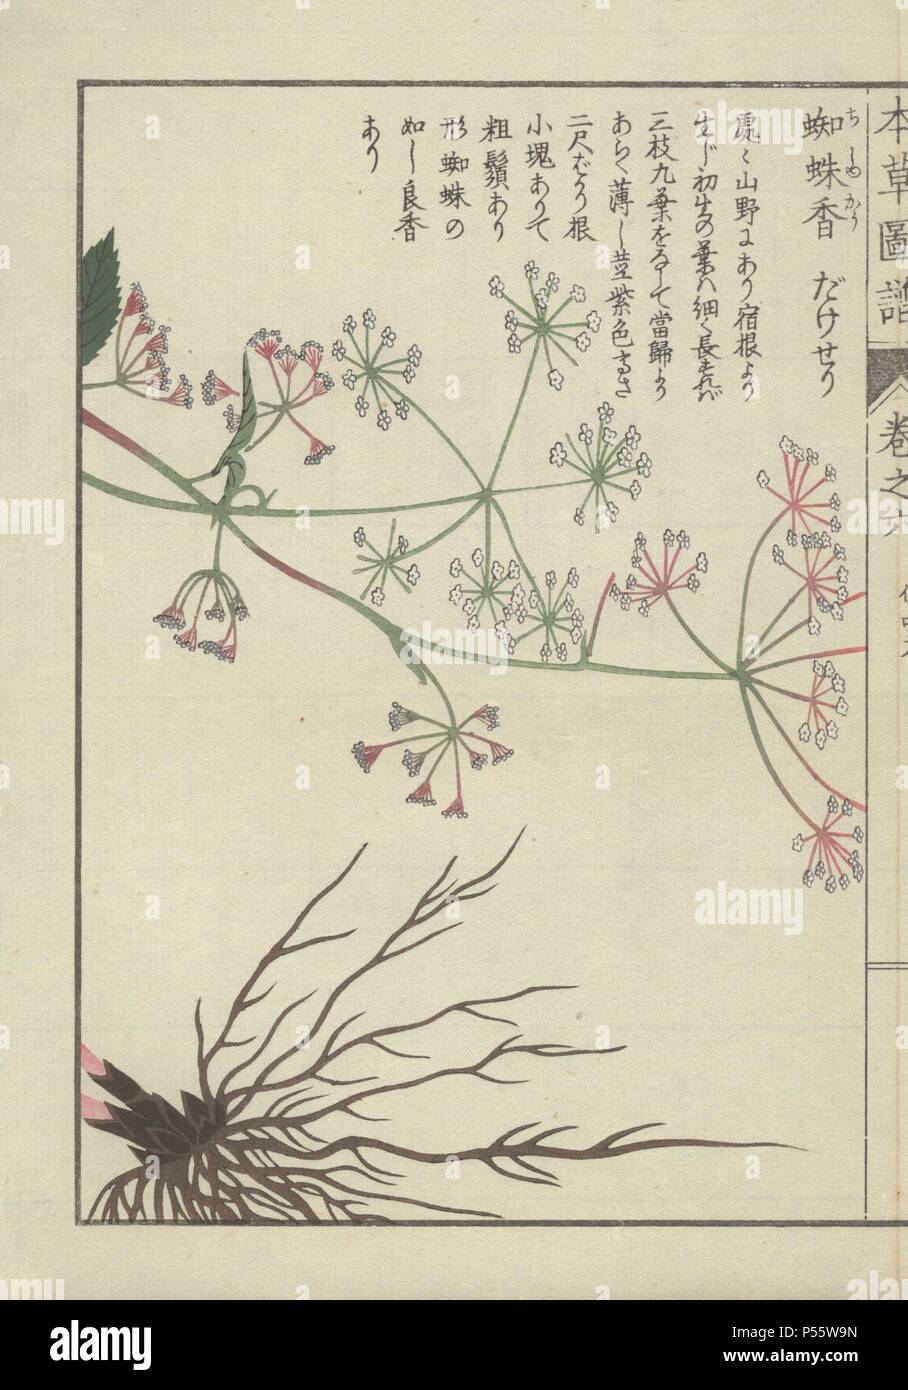 Roots and tiny pink and white flowers of burnet saxifrage. Pimpinella calycina. Chichukou.. Colour-printed woodblock engraving by Kan'en Iwasaki from 'Honzo Zufu,' an Illustrated Guide to Medicinal Plants, 1884. Iwasaki (1786-1842) was a Japanese botanist, entomologist and zoologist. He was one of the first Japanese botanists to incorporate western knowledge into his studies. Stock Photo